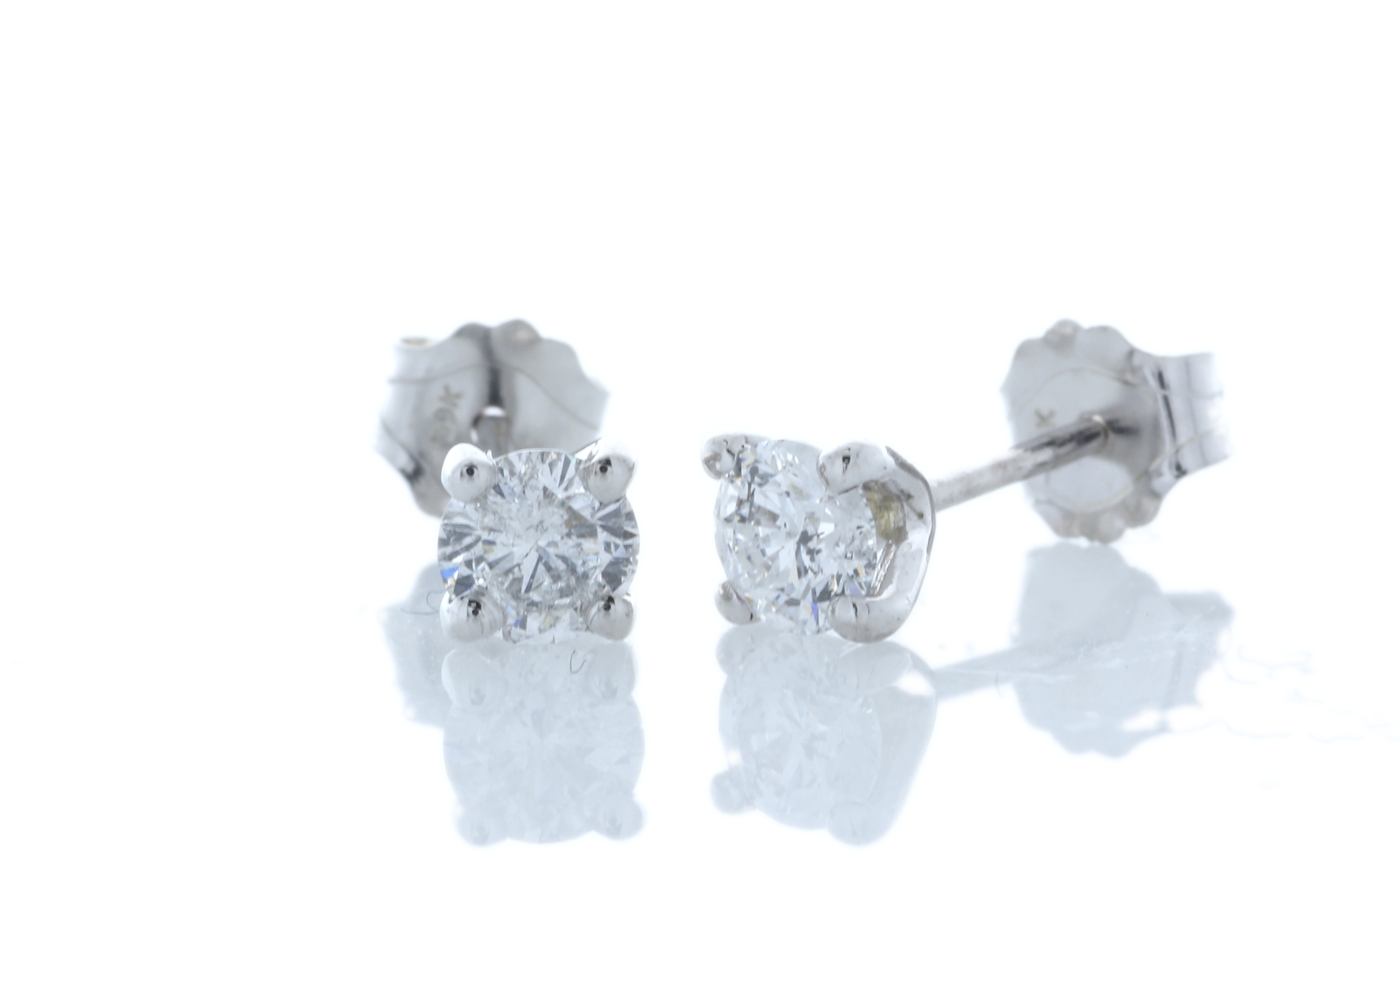 9ct White Gold Single Stone Claw Set Diamond Earring 0.42 Carats - Image 2 of 3